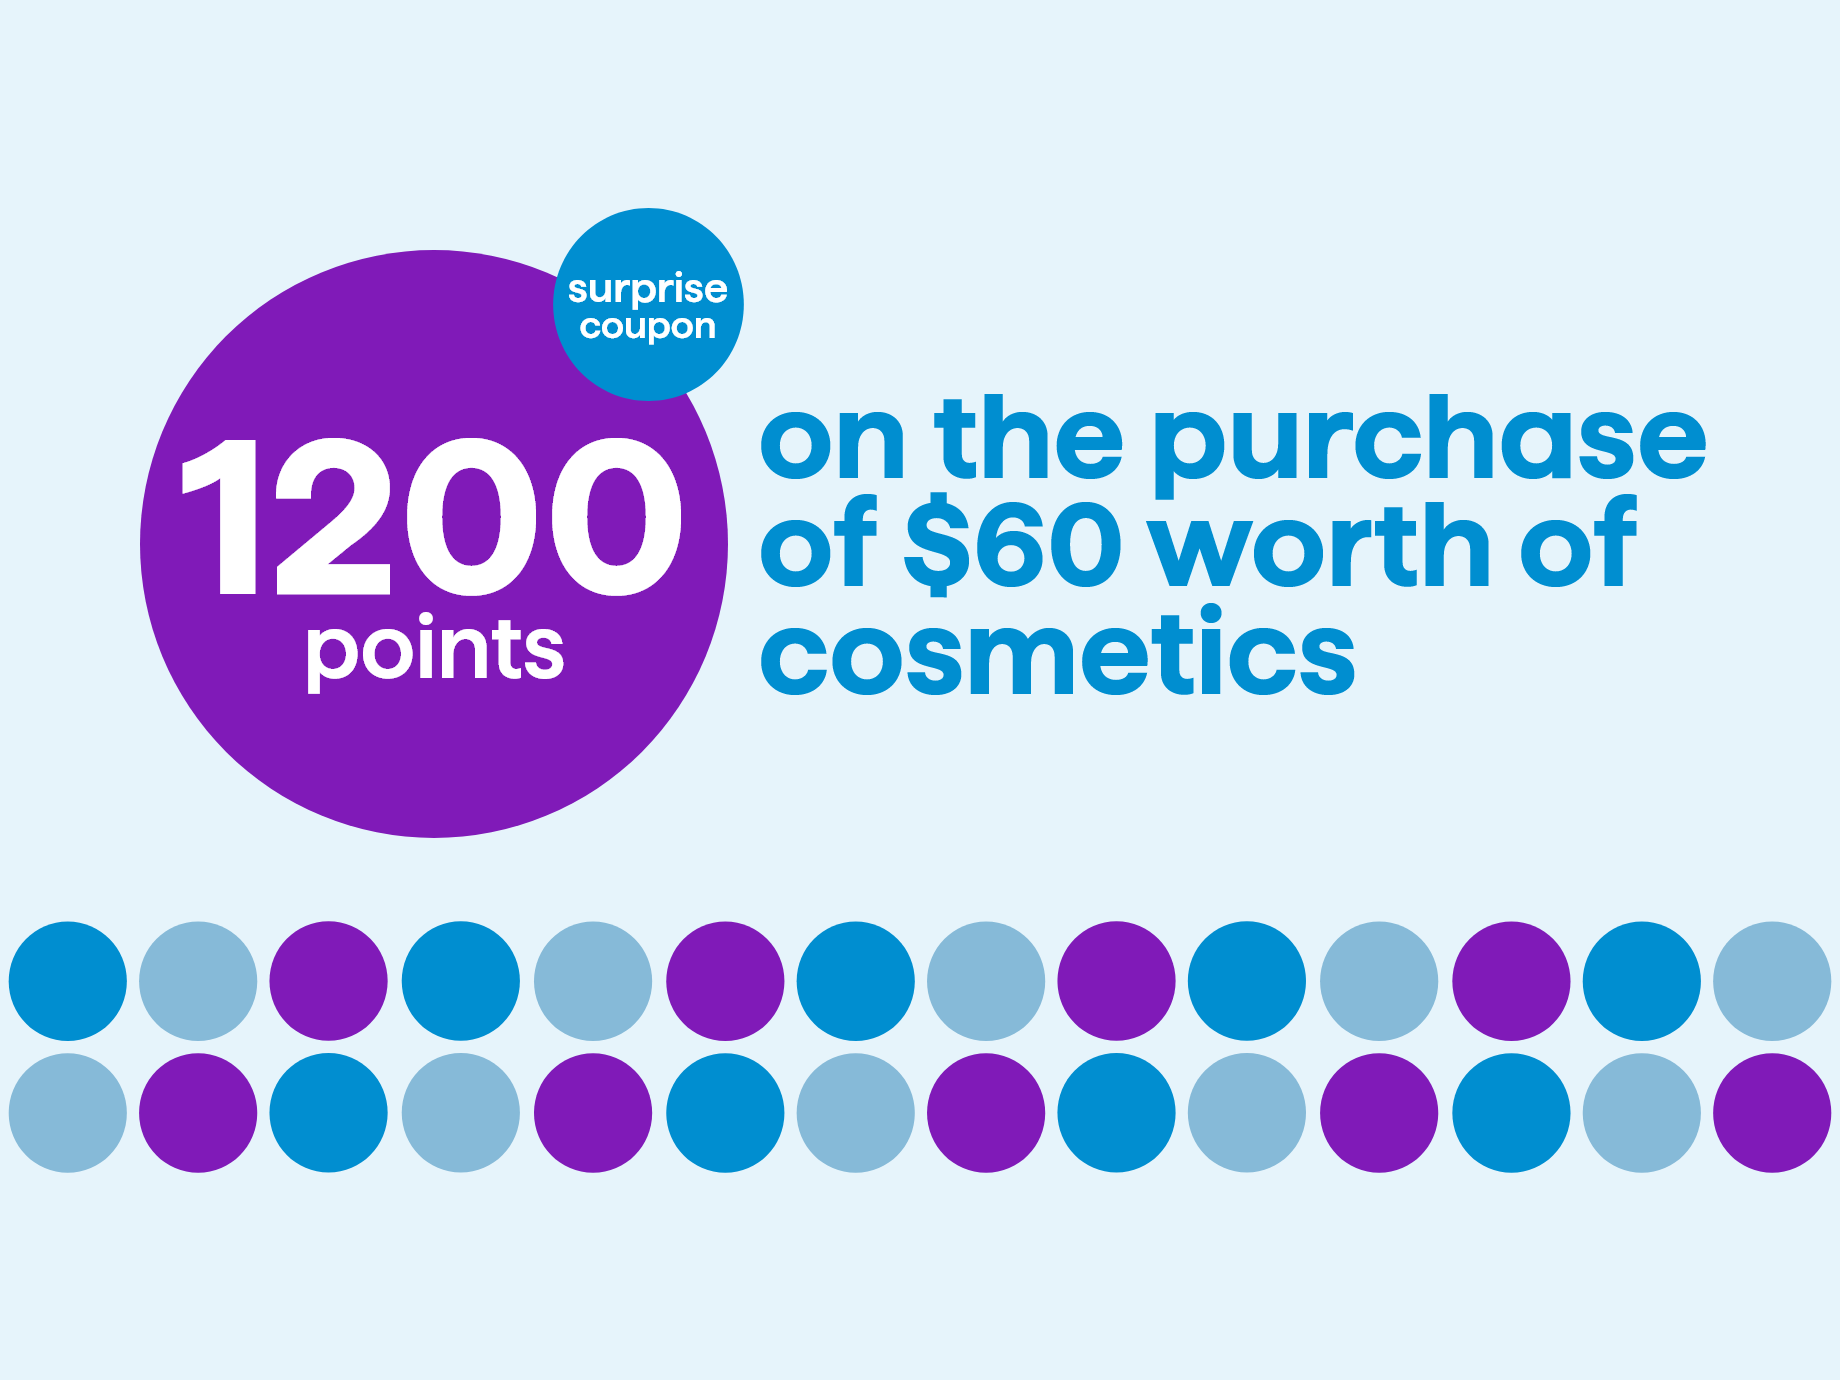 Surprise coupon - 1200 points on the purchase of $60 worth of cosmetics